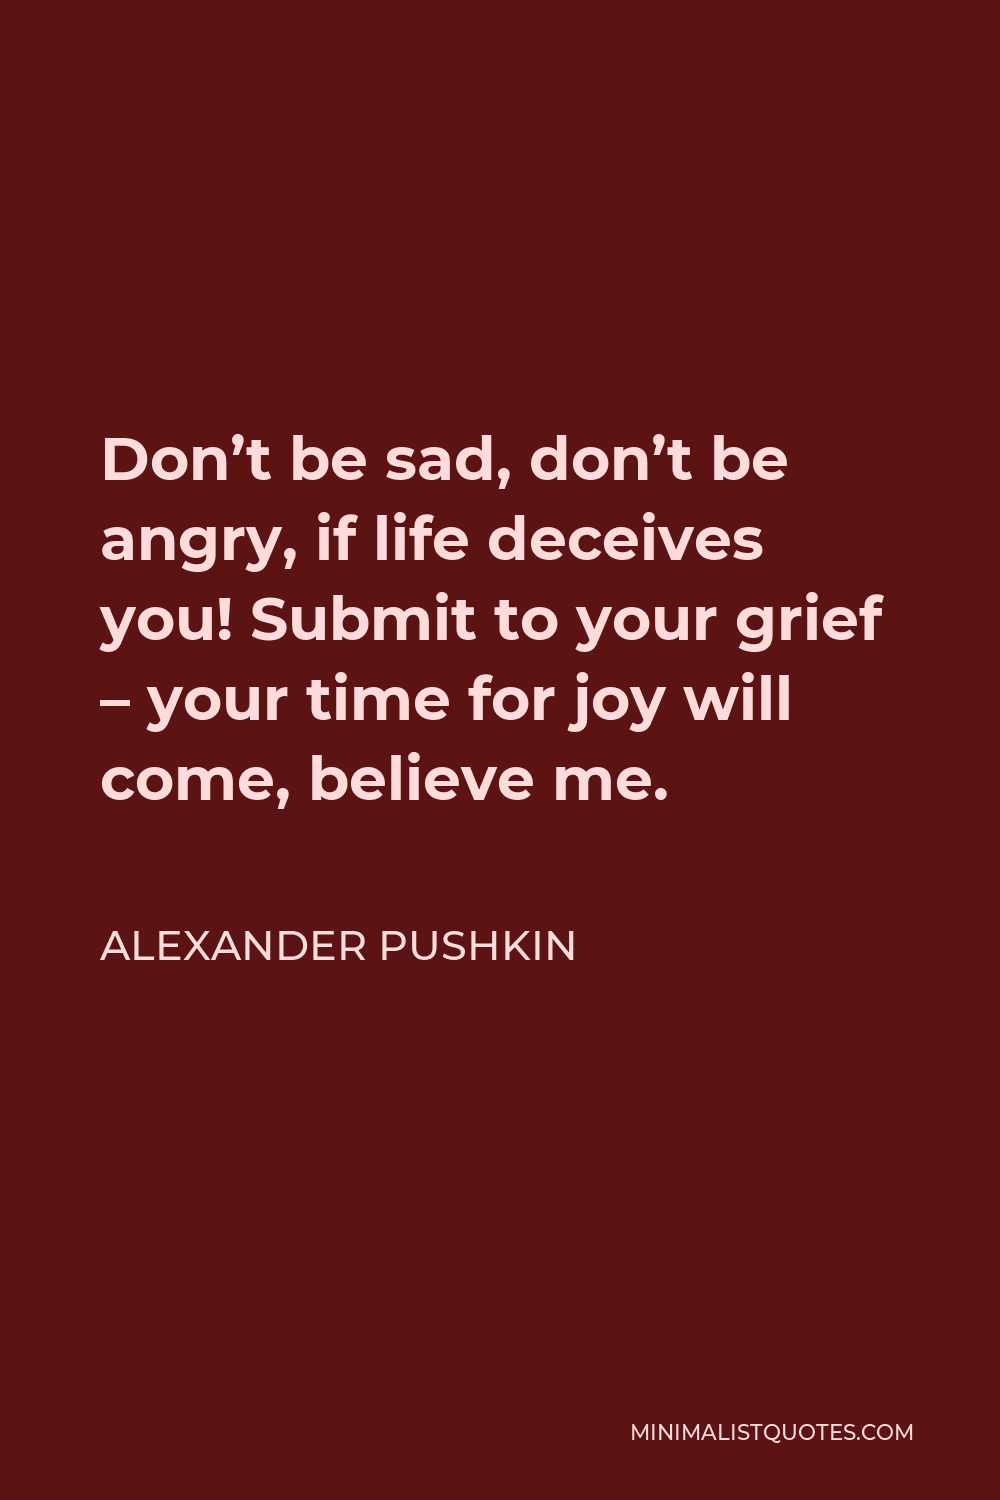 Alexander Pushkin Quote: Don't be sad, don't be angry, if life deceives ...